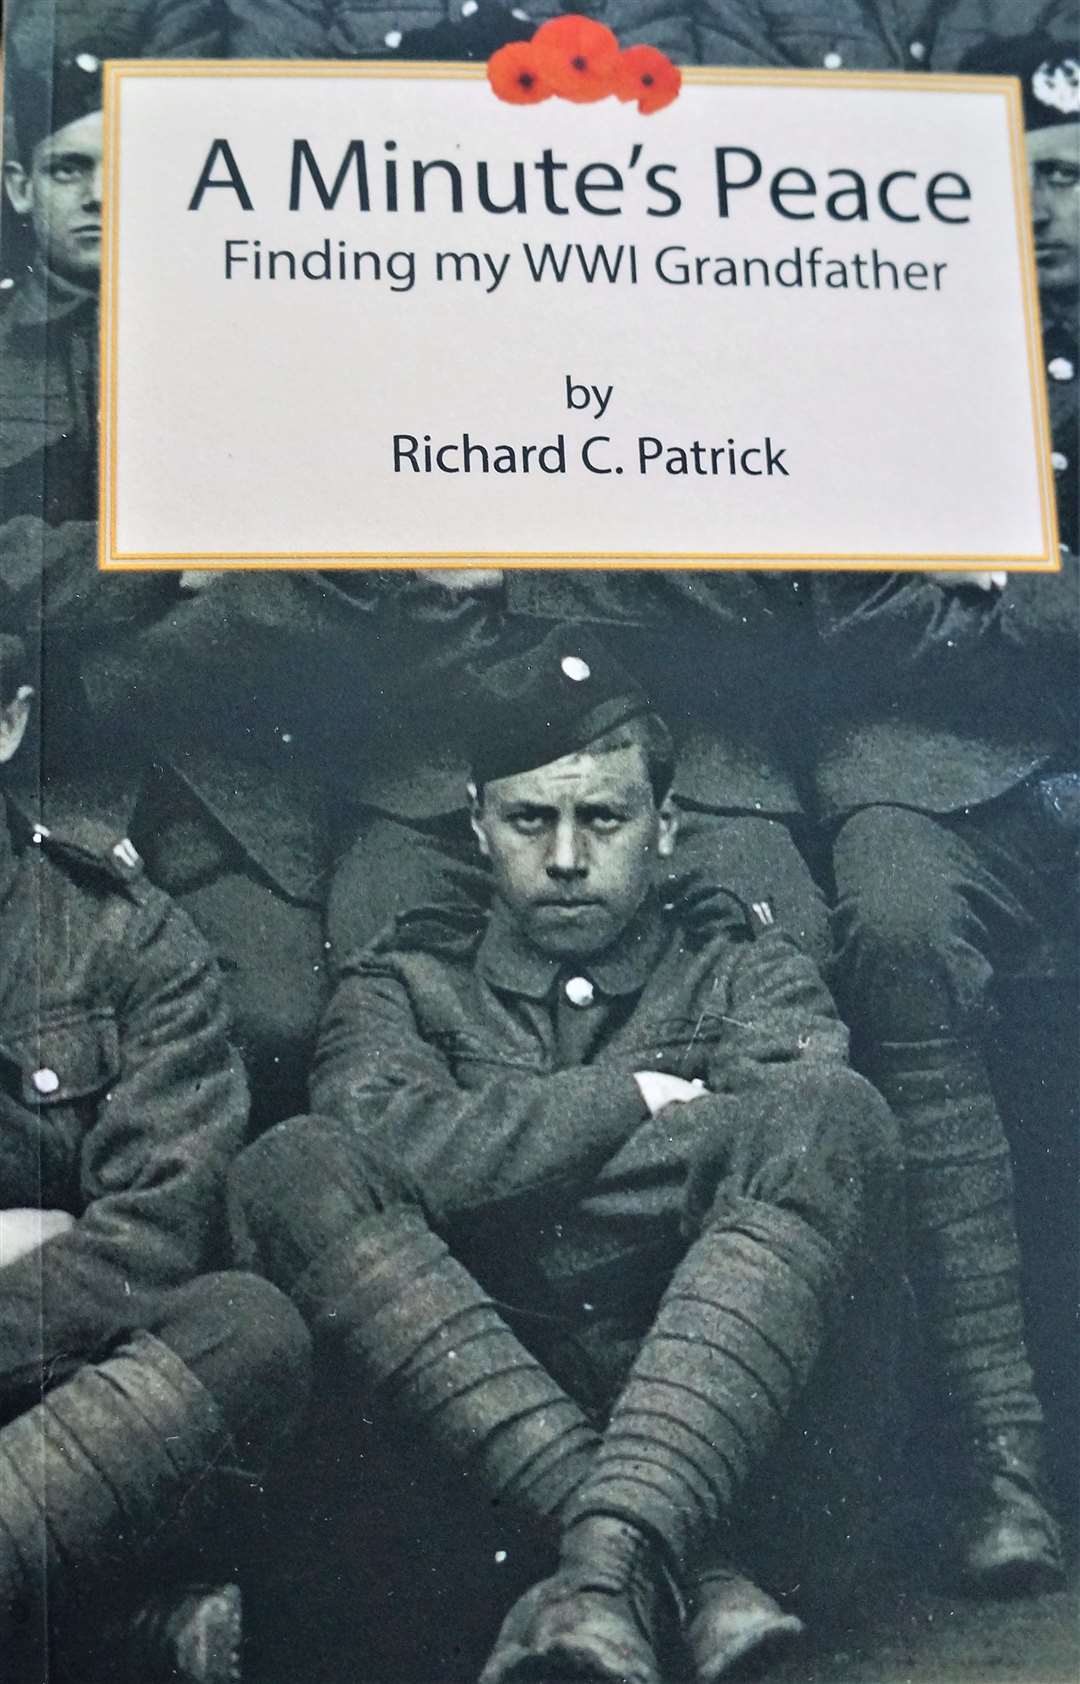 The cover of Richard Patrick's new book.